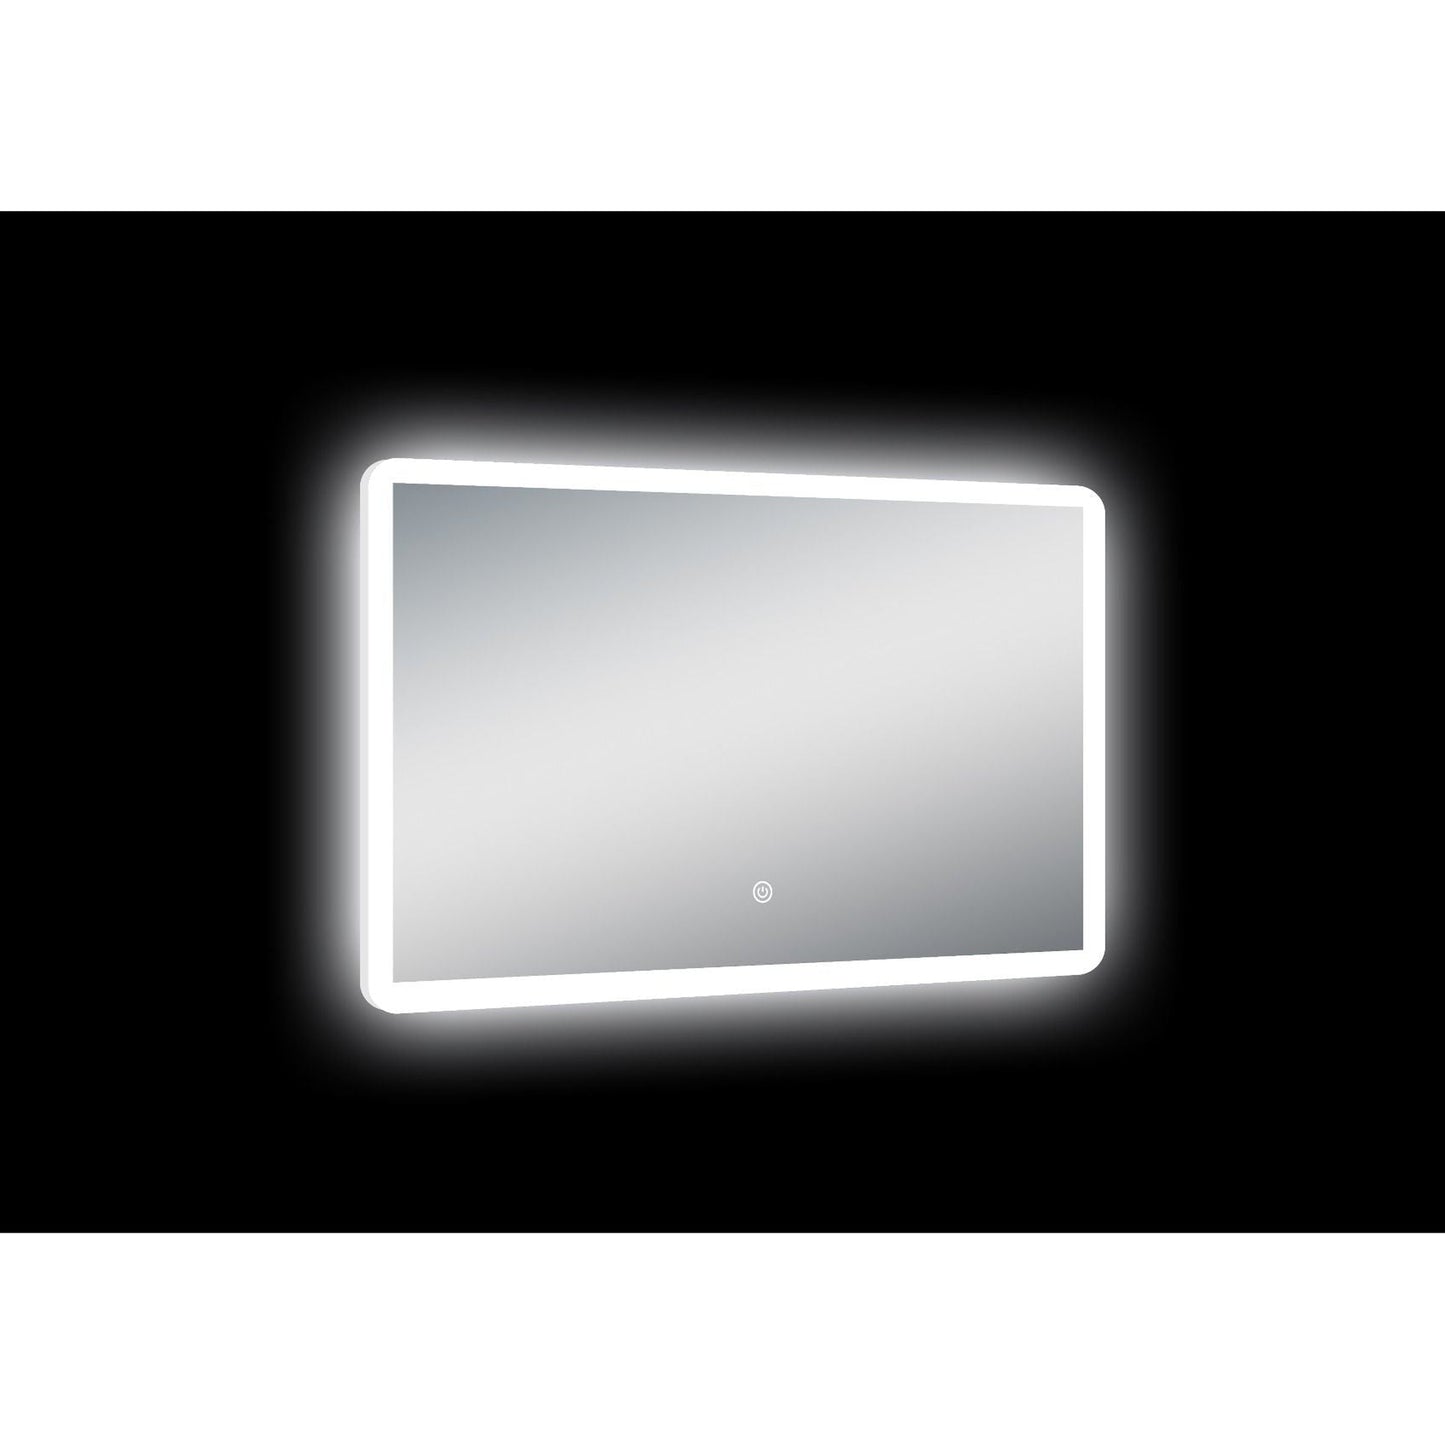 DreamWerks Pilsen 32" W x 32" H LED Mirror with Dimmer and Defogger